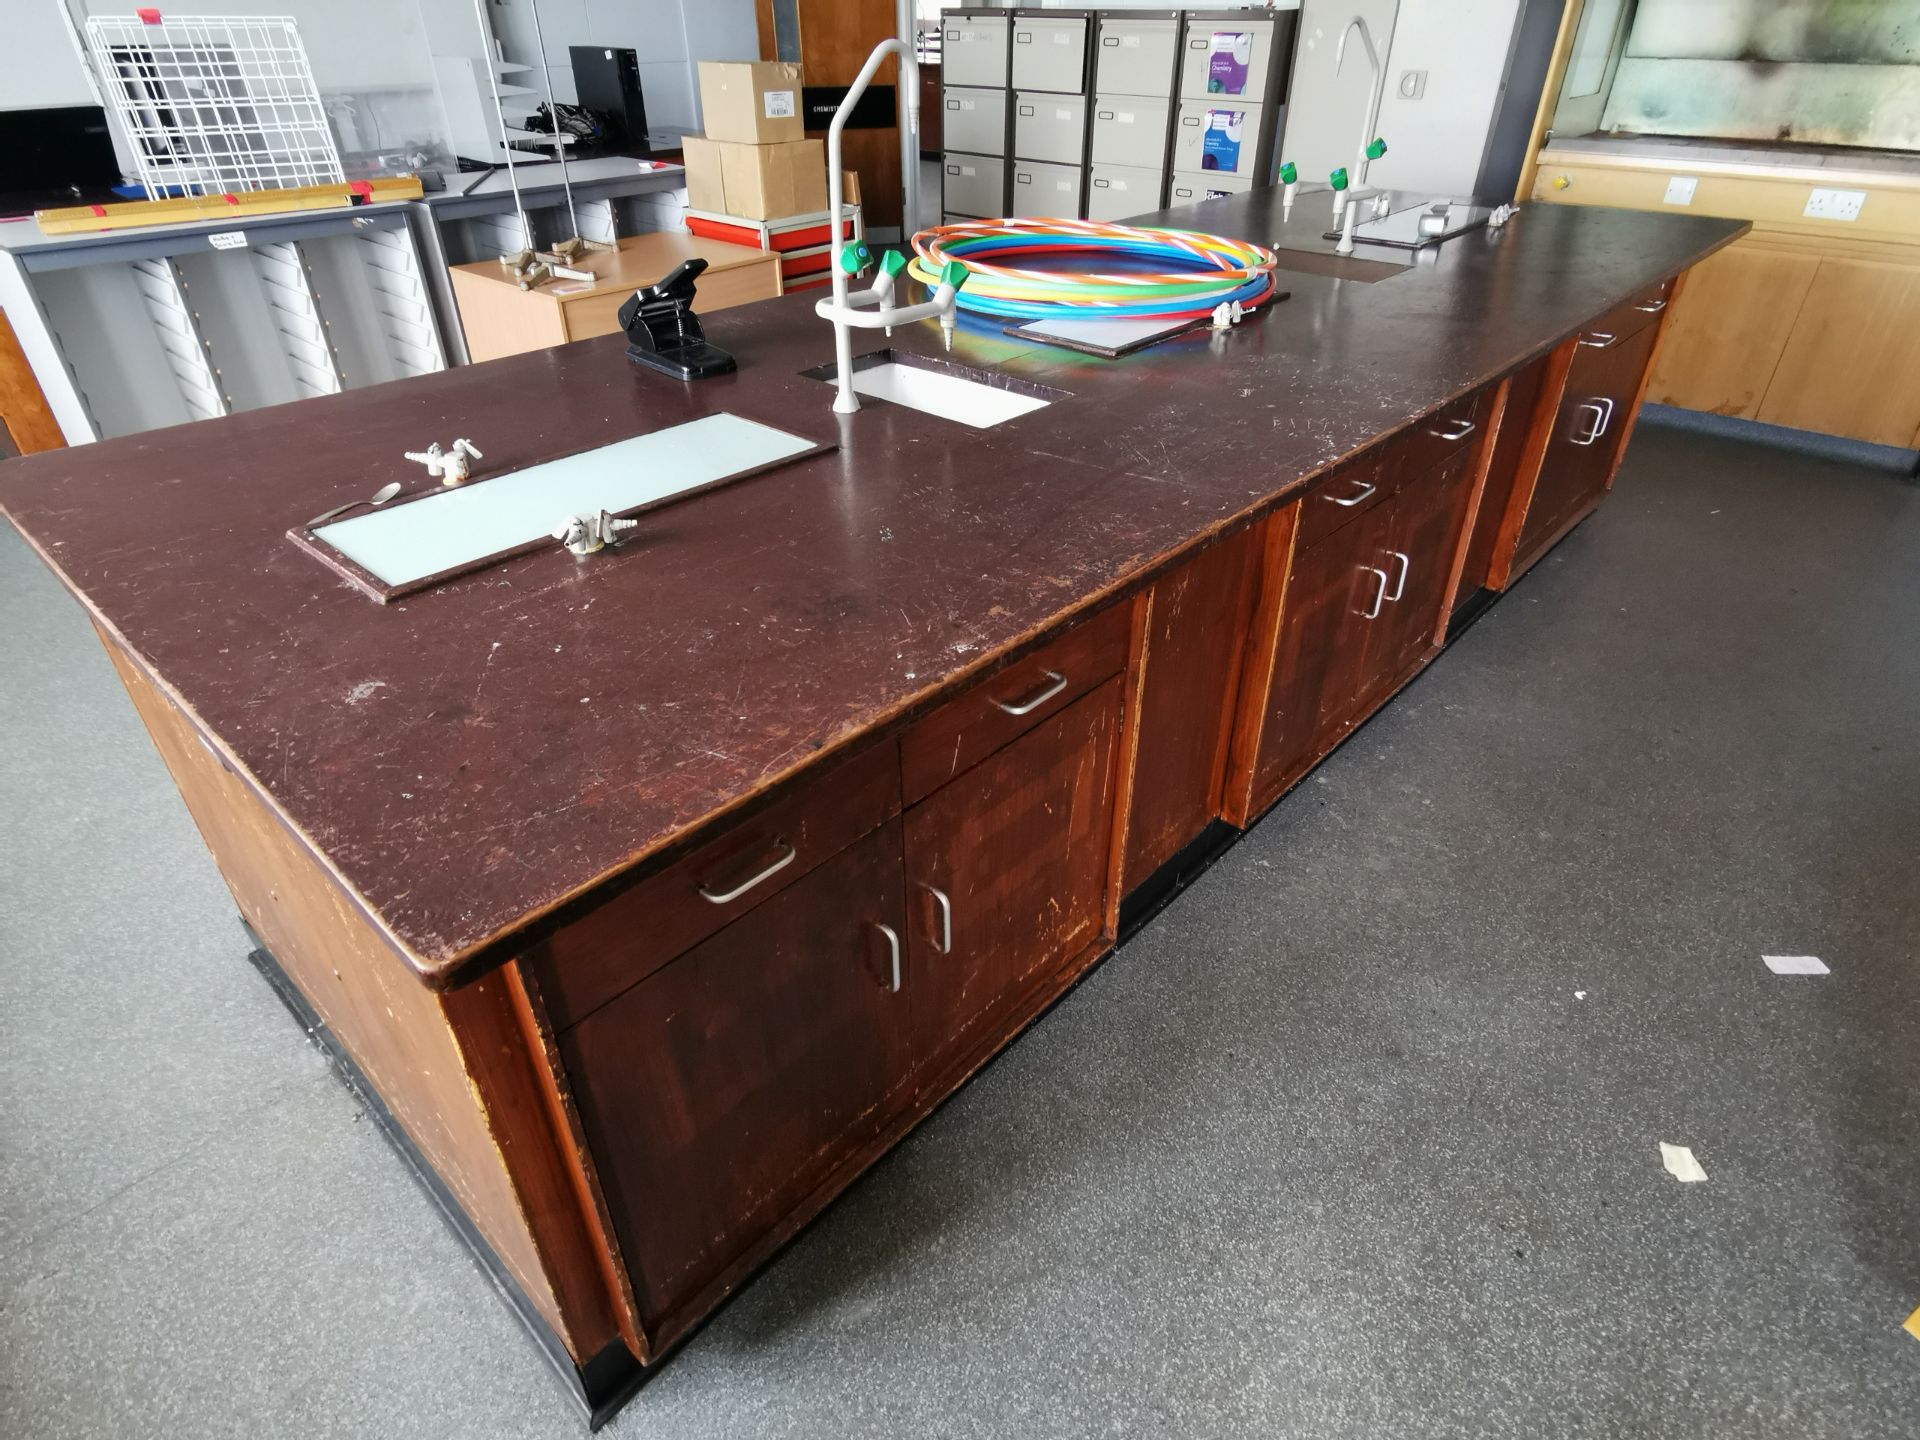 12ft Vintage Wooden workbench with built in gas taps,sinks and 3x Heatproof pads, With storage and